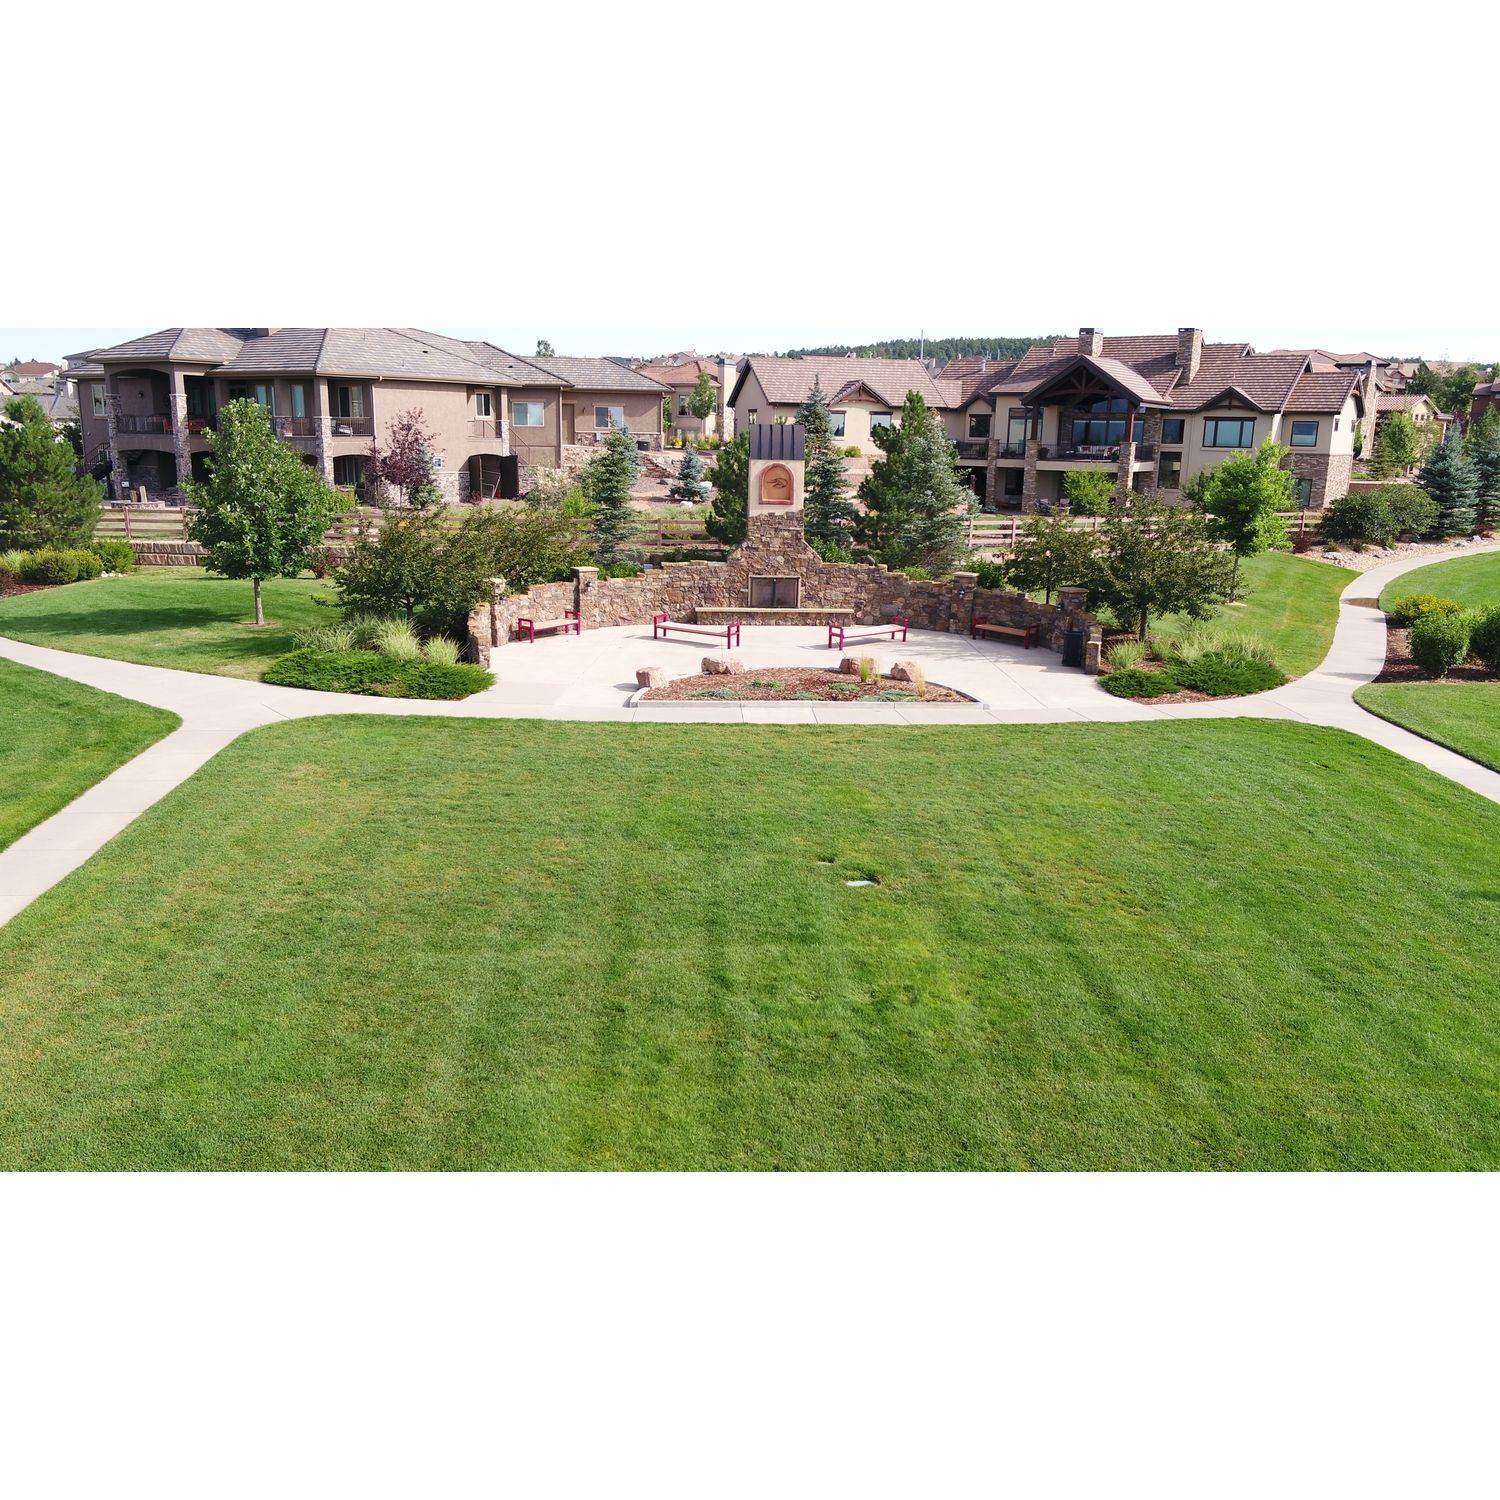 8. Flying Horse建於 2409 Parma Court, Colorado Springs, CO 80921